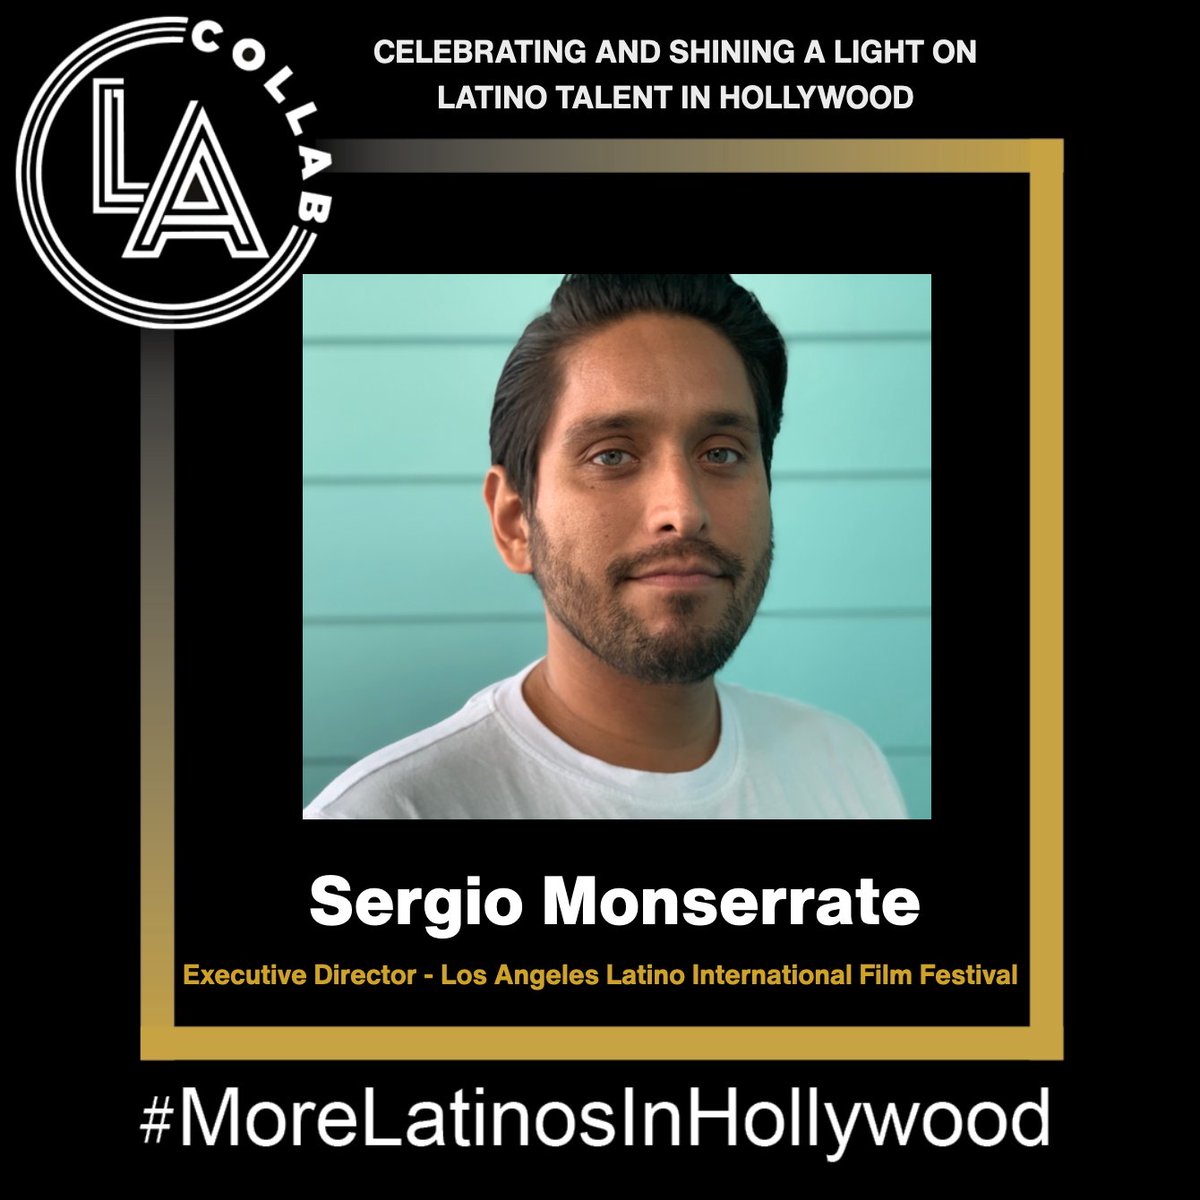 LA Collab is happy to celebrate Latinos from different parts of the Hollywood ecosystem making a positive impact for our community. Today we shine a light on Sergio Monserrate (@sergmonserrate). (1/4)